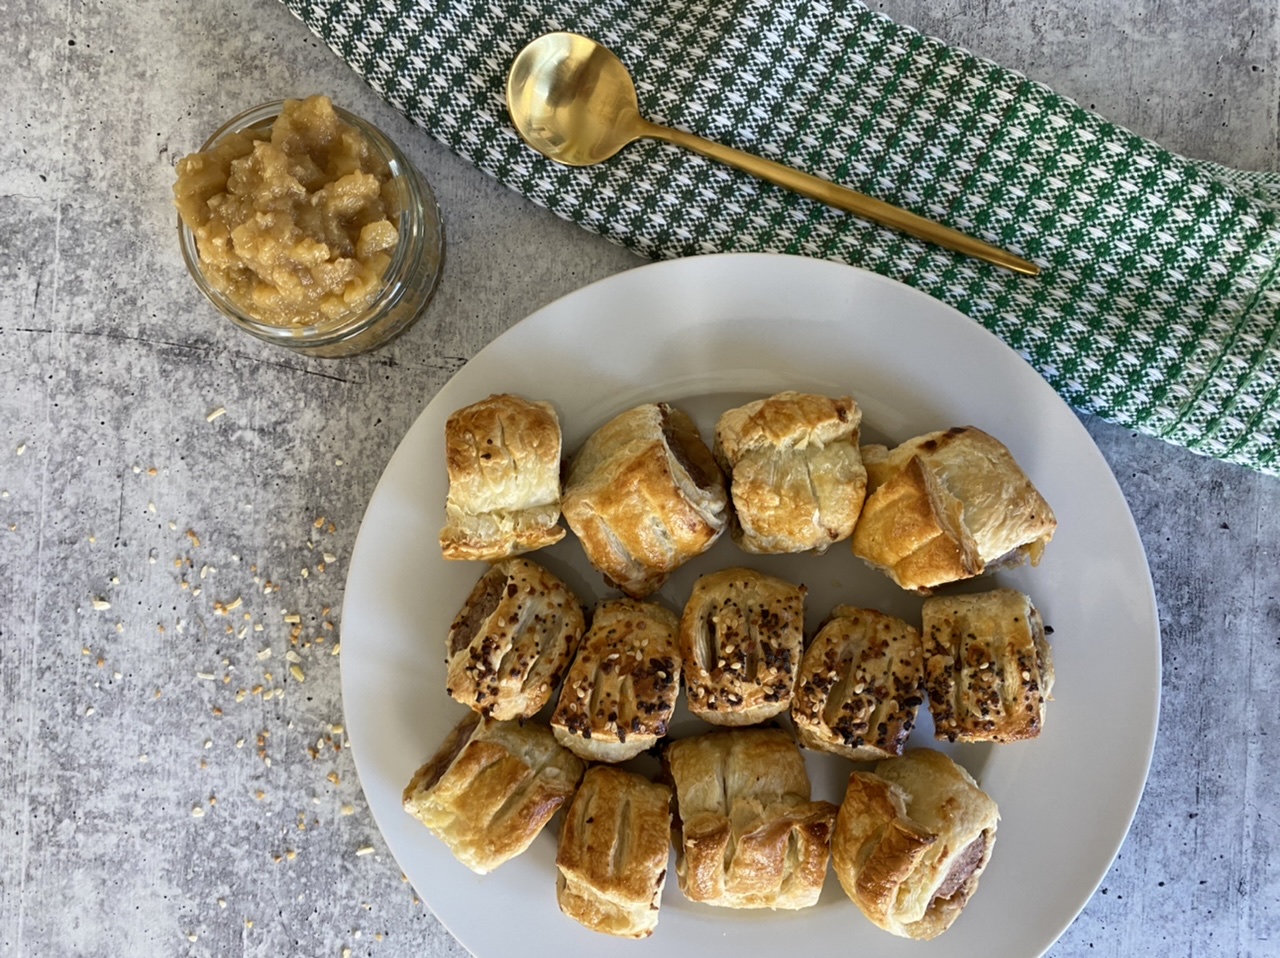 37412077 C044 4691 816D 4451A33E309B - How to Make Sausage Rolls with Apple Chutney